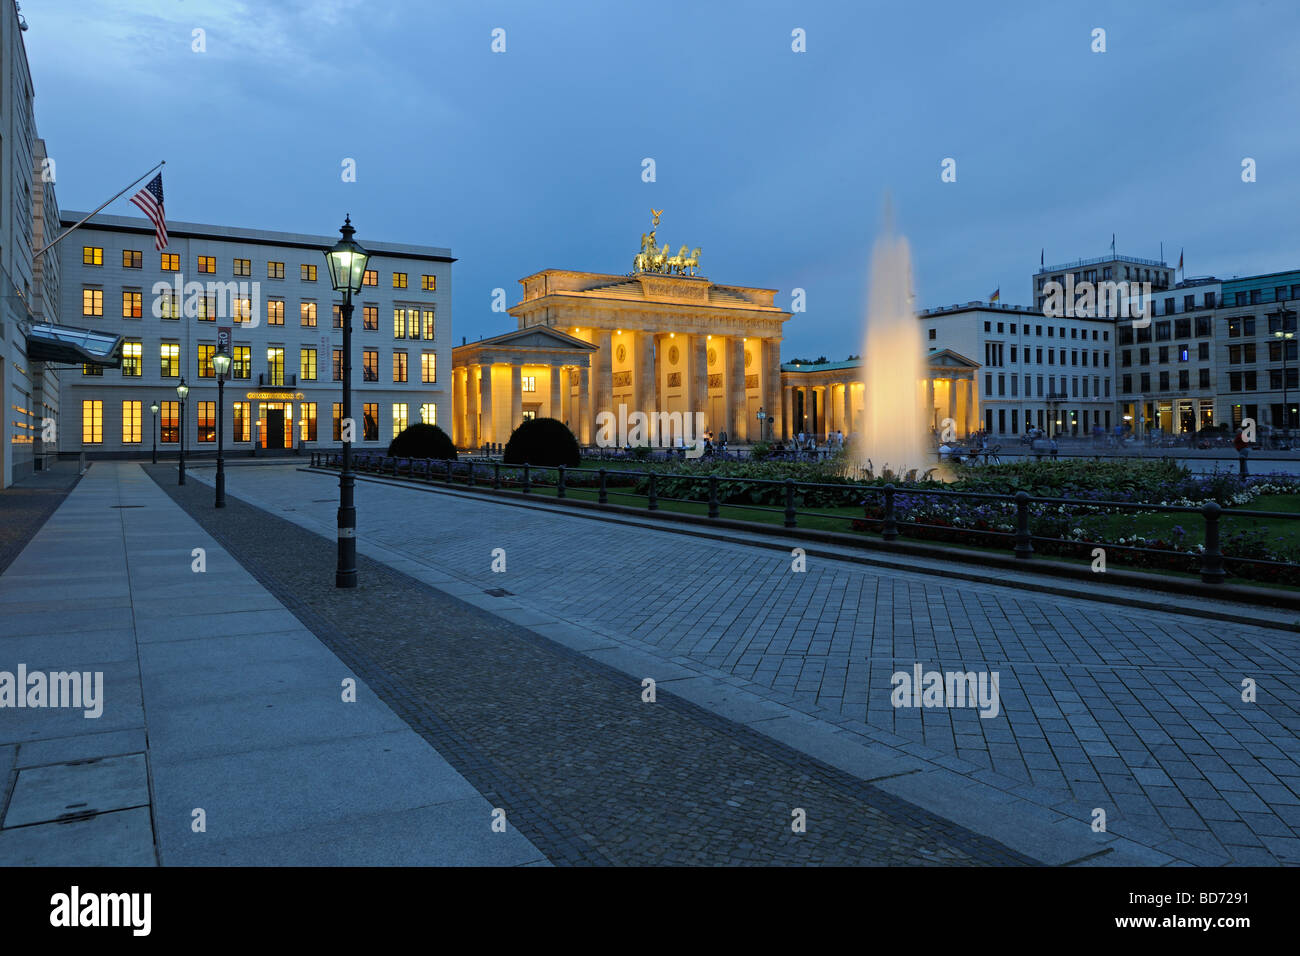 View of the Pariser Platz square with the Brandenburg Gate and the U.S. embassy on the left at dusk, Berlin, Germany, Europe Stock Photo